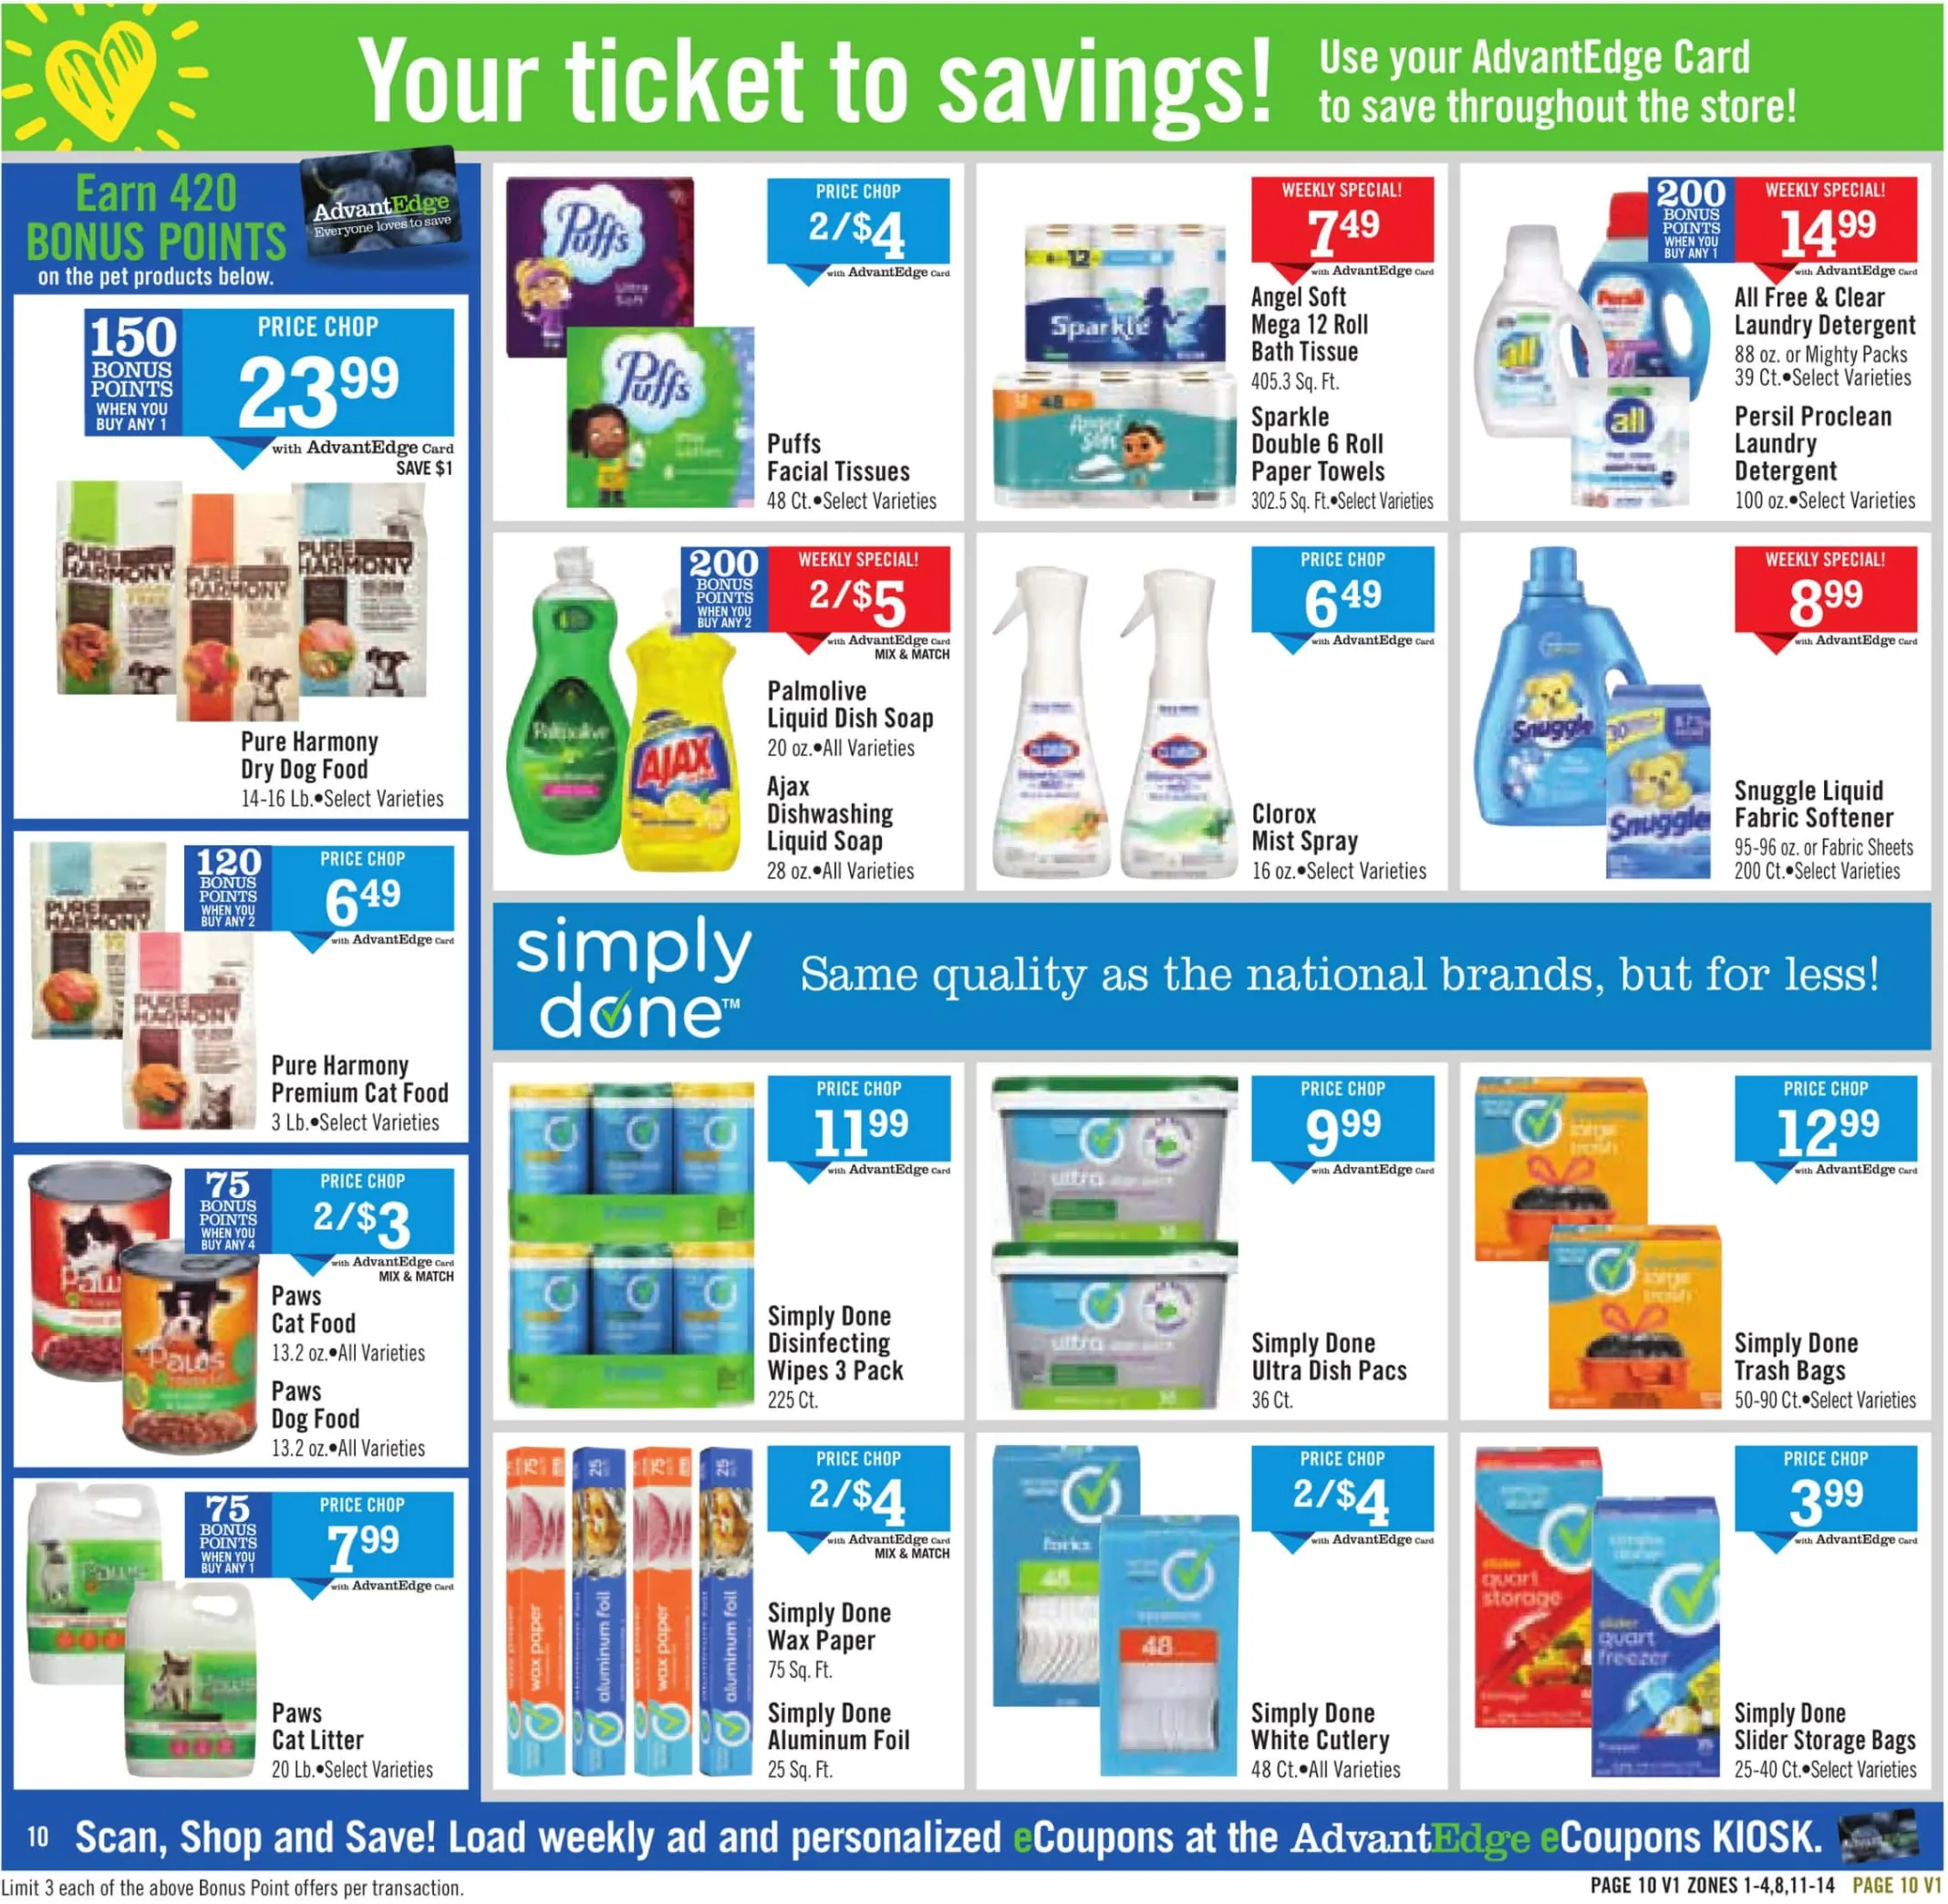 Price Chopper July 2024 Weekly Sales, Deals, Discounts and Digital Coupons.